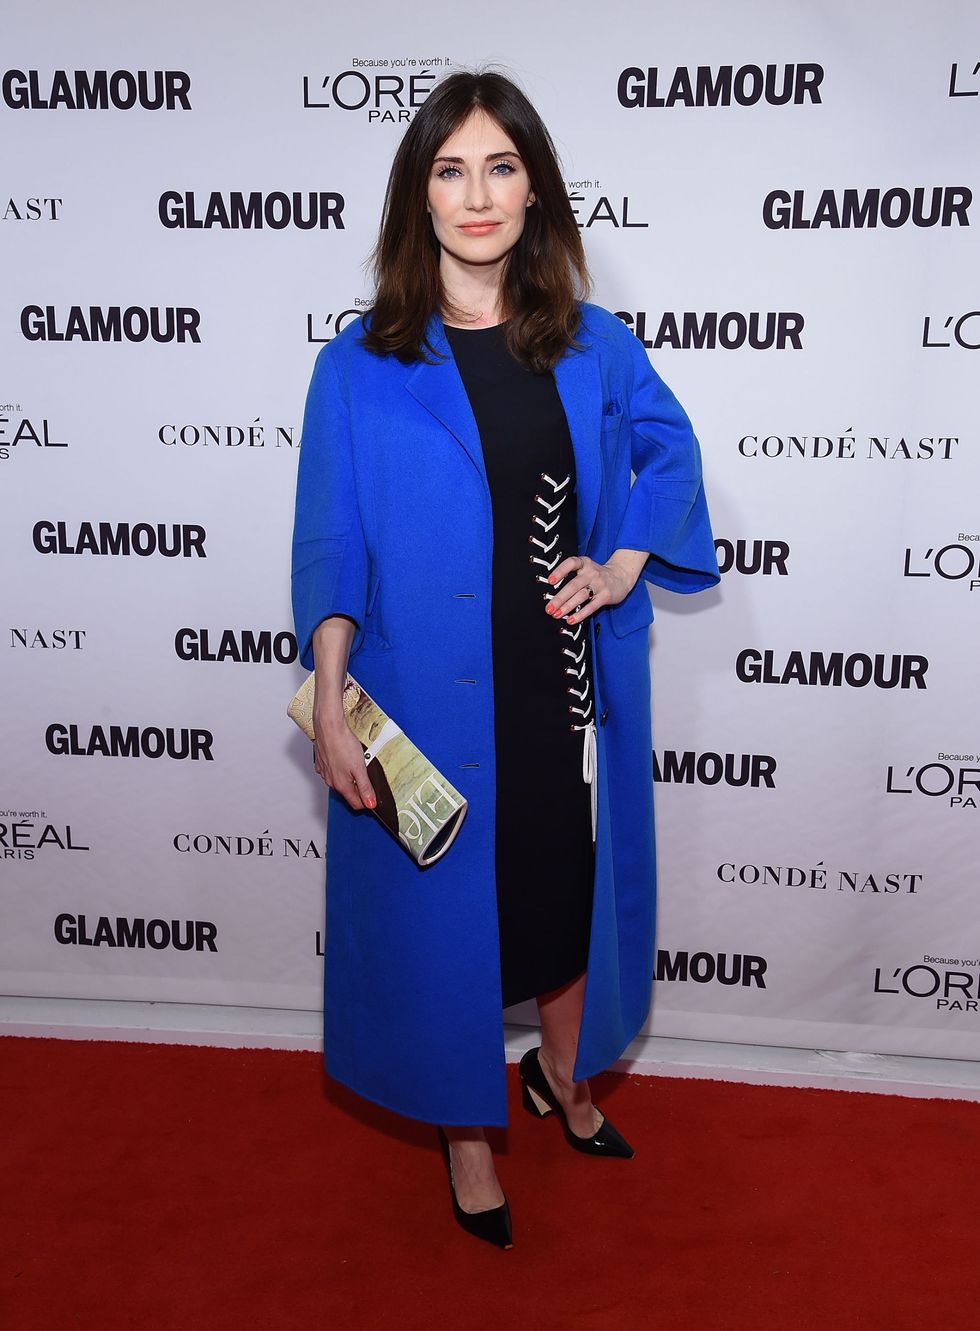 NEW YORK, NY - NOVEMBER 10:  Carice van Houten attends the Glamour 2014 Women Of The Year Awards at Carnegie Hall on November 10, 2014 in New York City.  (Photo by Jamie McCarthy/WireImage)